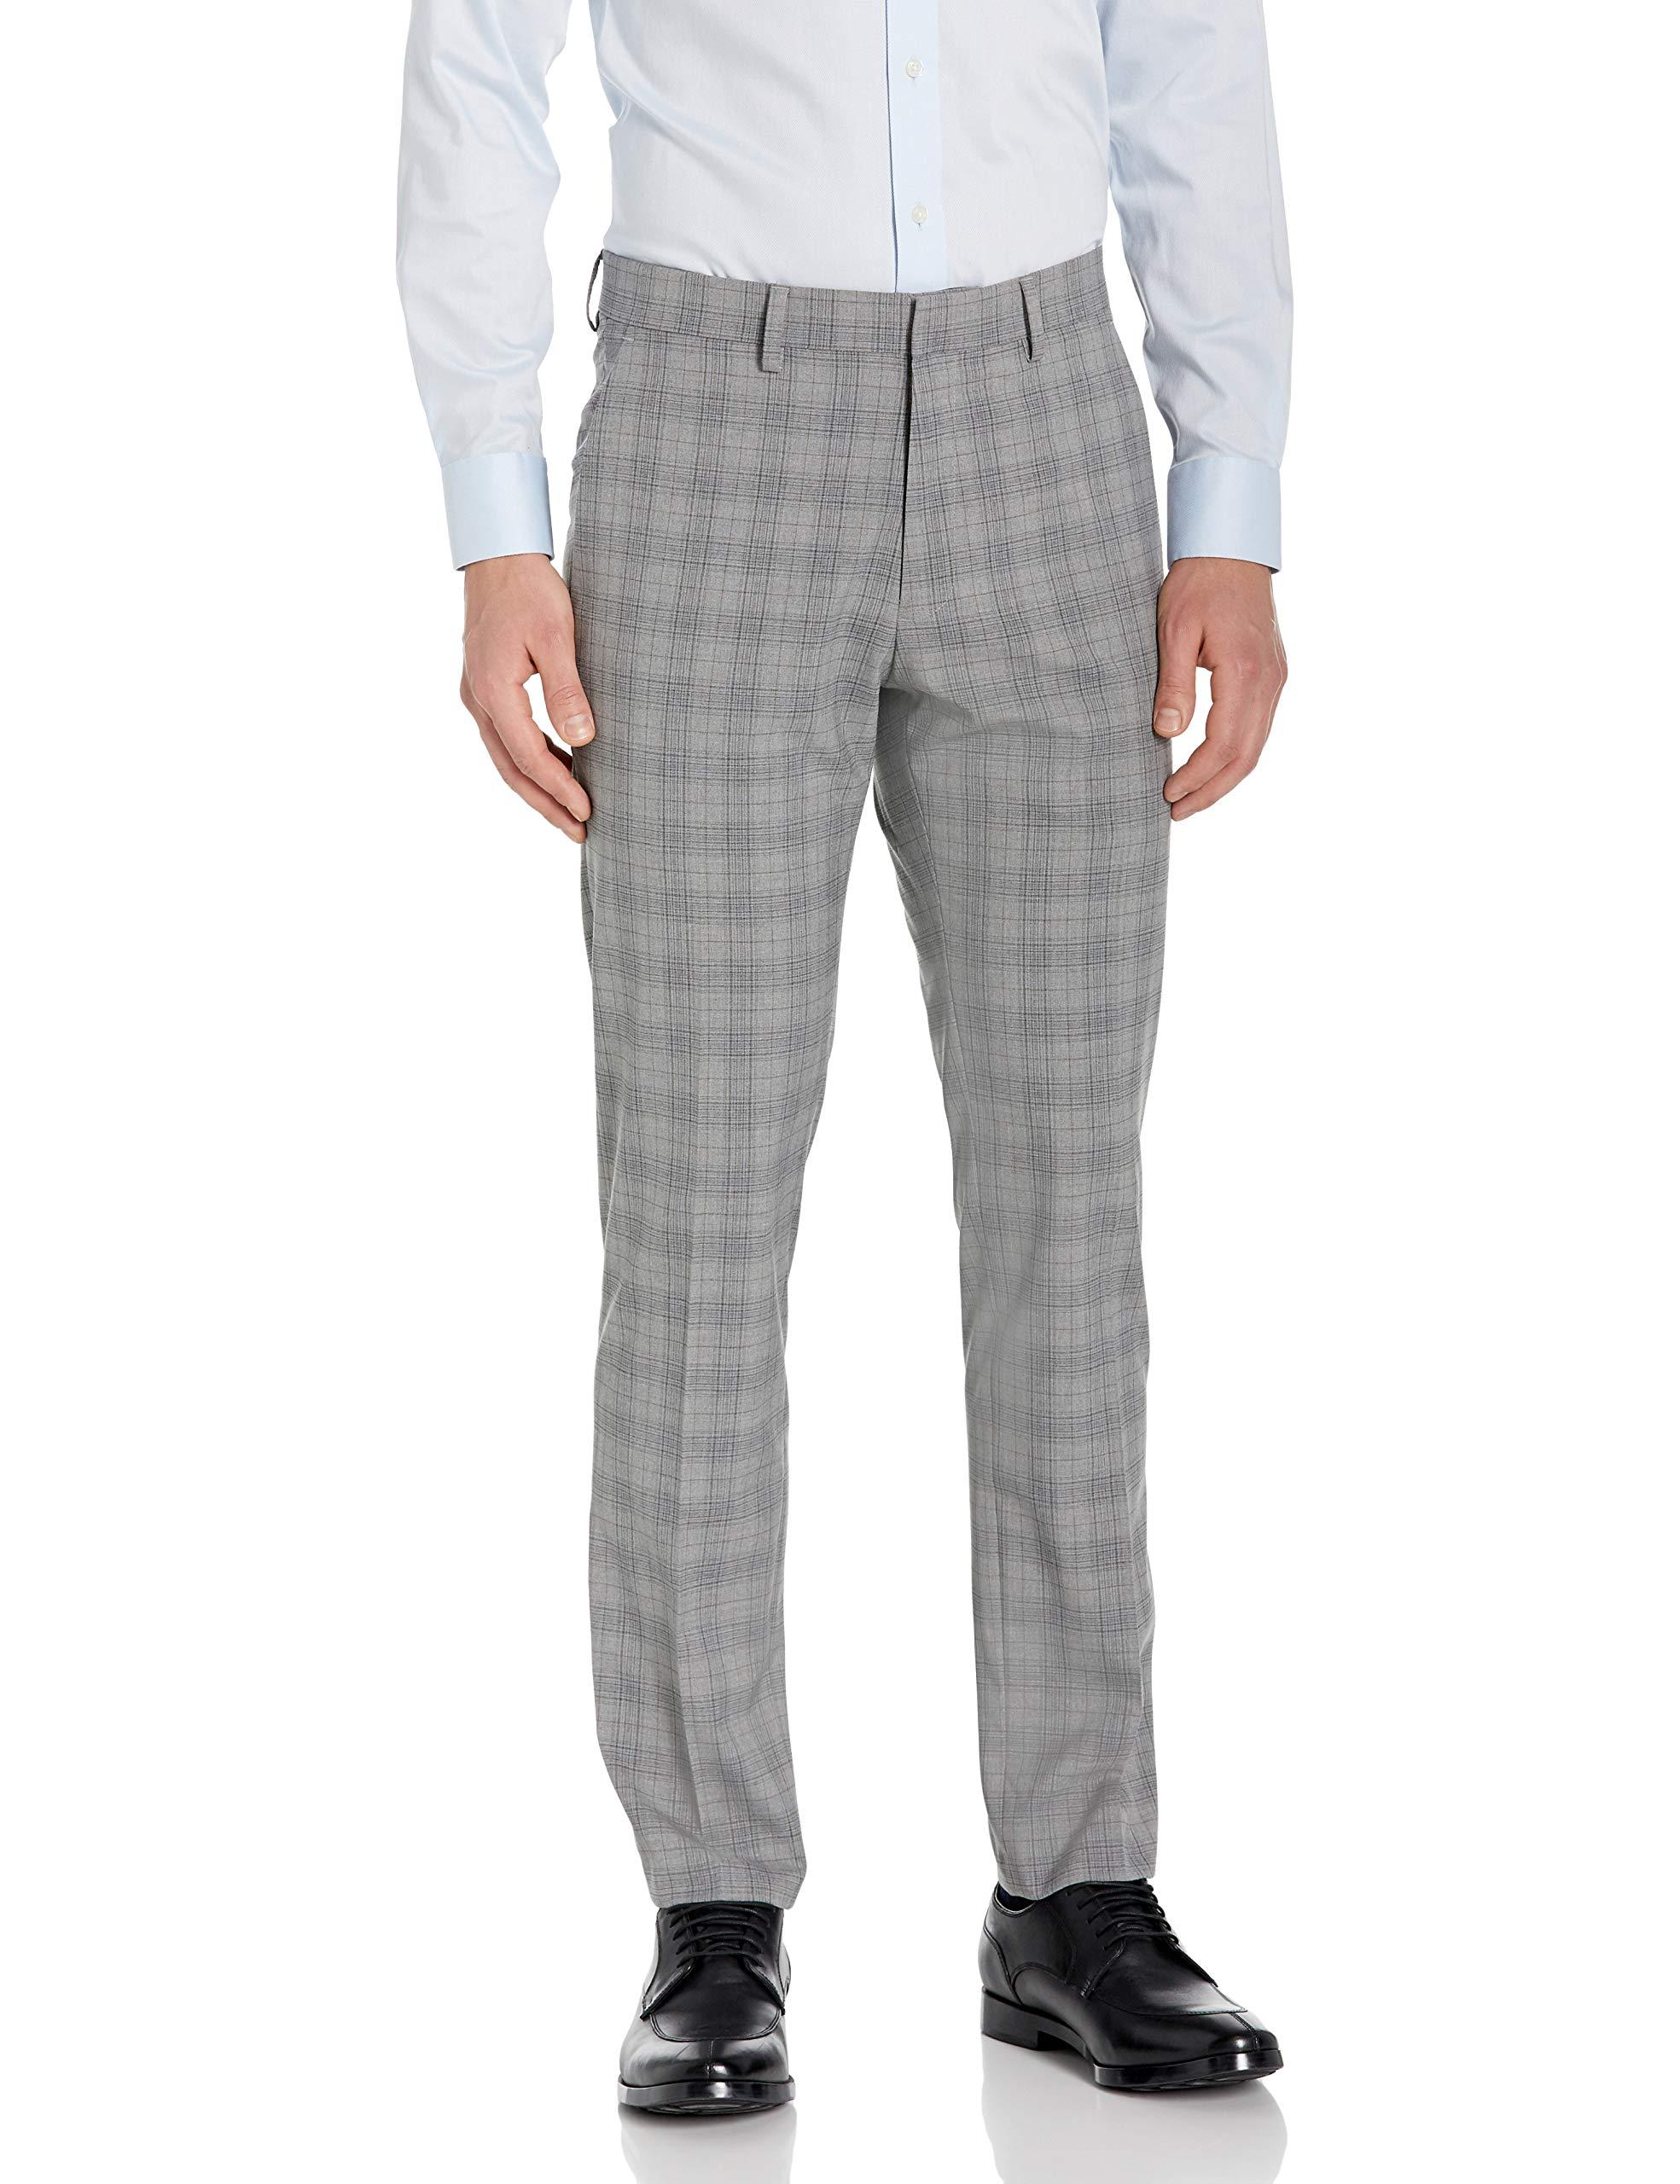 Kenneth Cole REACTION Mens Stretch Traditional Plaid Slim Fit Flat Front Flex Waistband Dress Pant